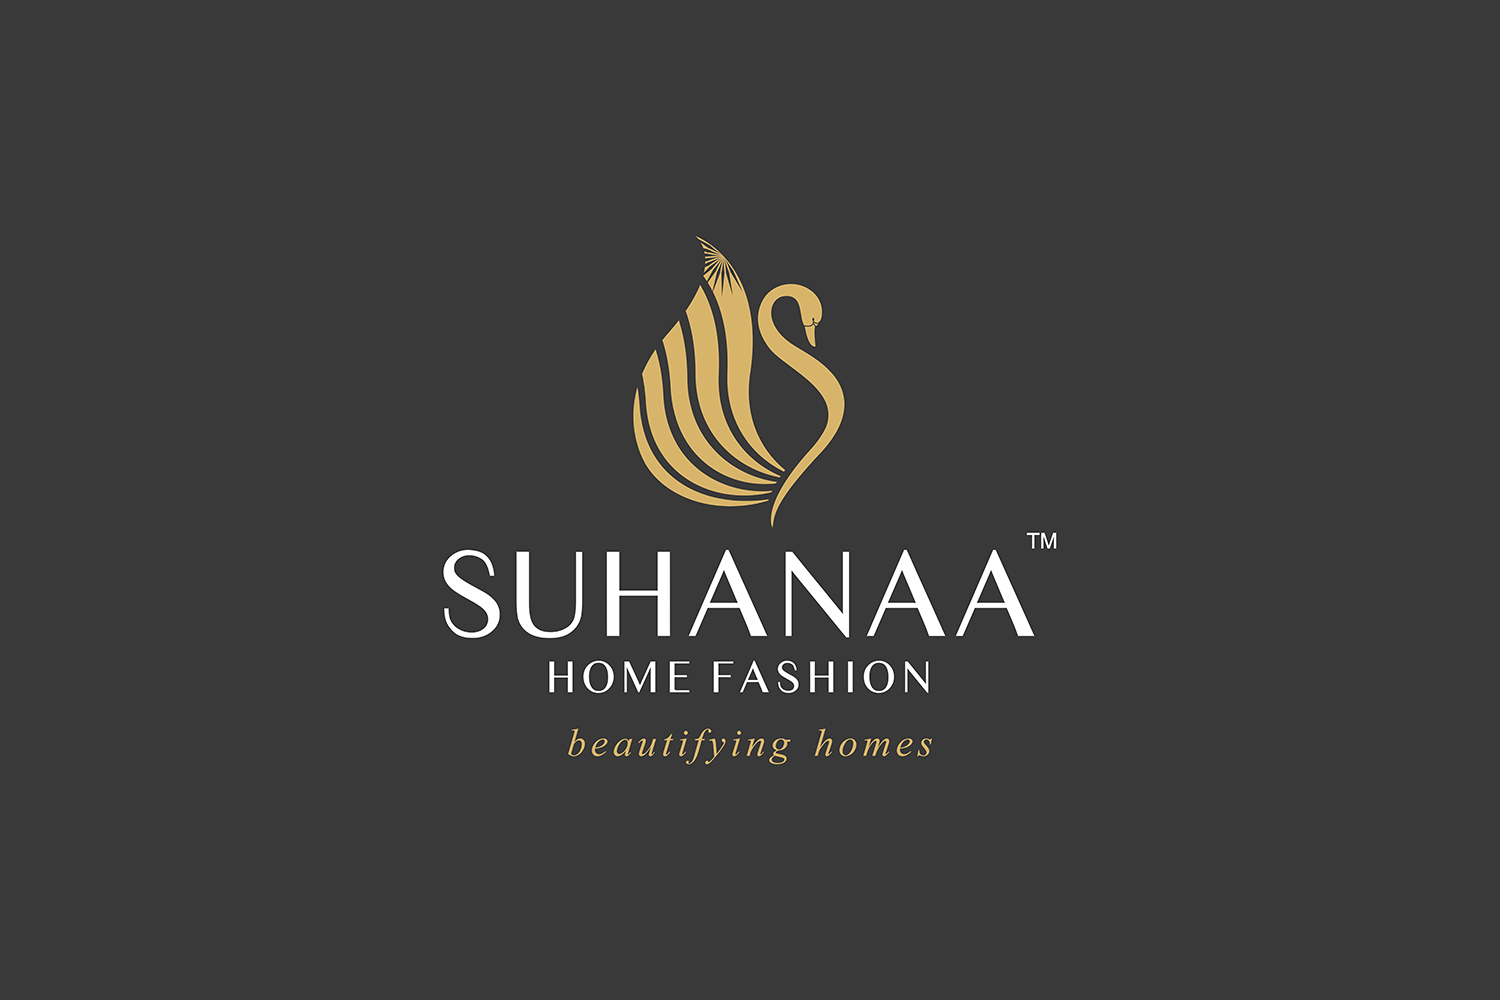 Home fashion branding hyderabad, Bangalore, india - Furniture & Furniture branding india, Corporate brand designers from hyderabad, Bangalore, the best brand building agency, advertising agency, world class designers in hyderabad, Hospitality branding